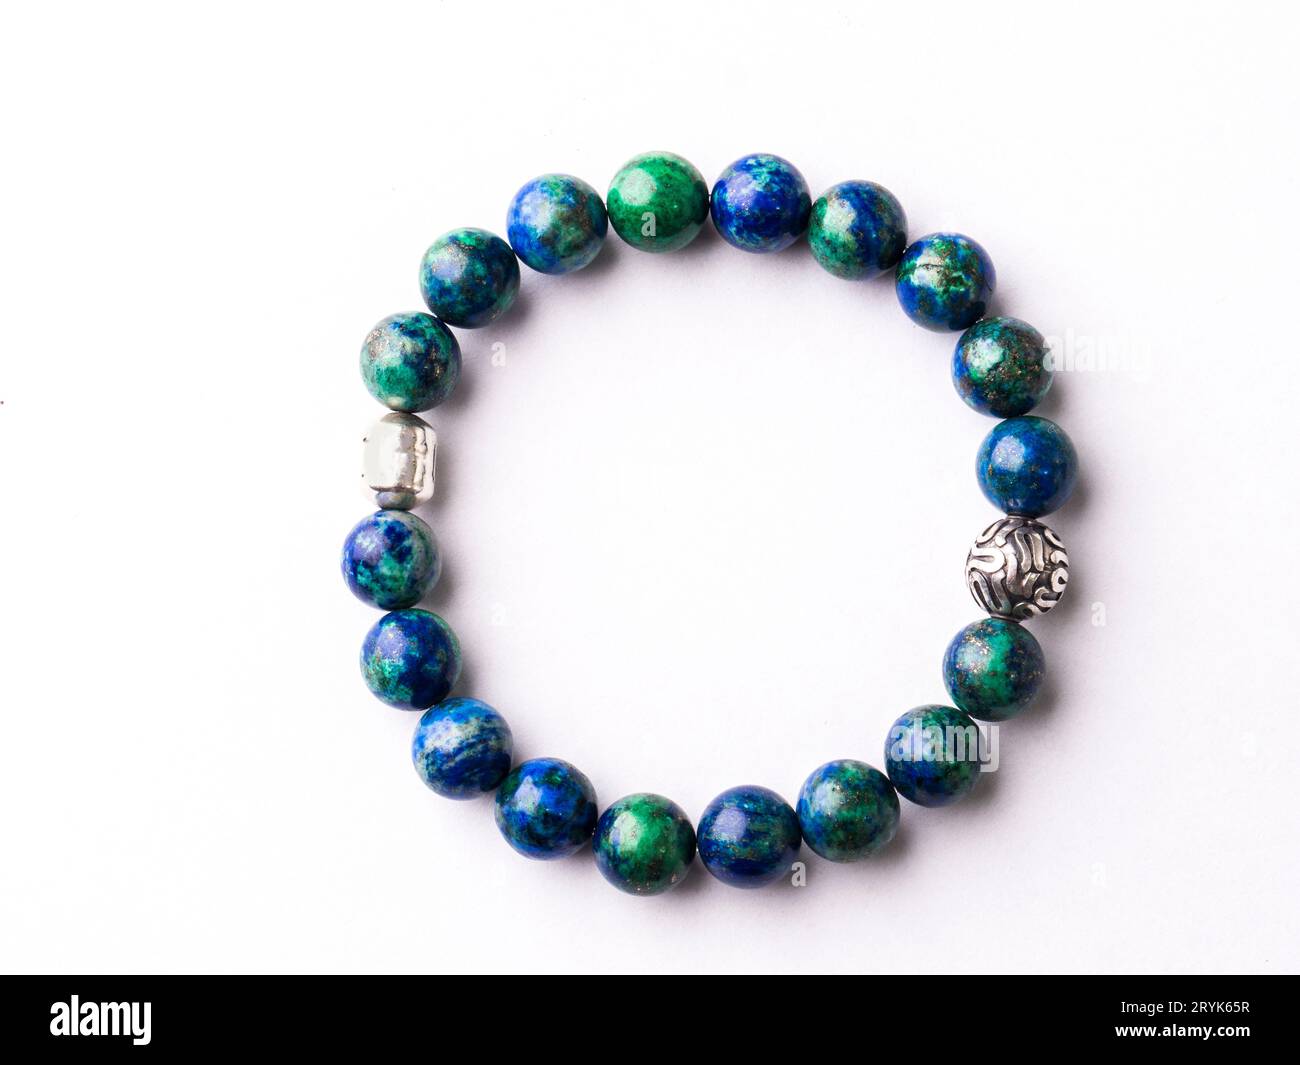 A blue and green beaded bracelet on a white surface Stock Photo